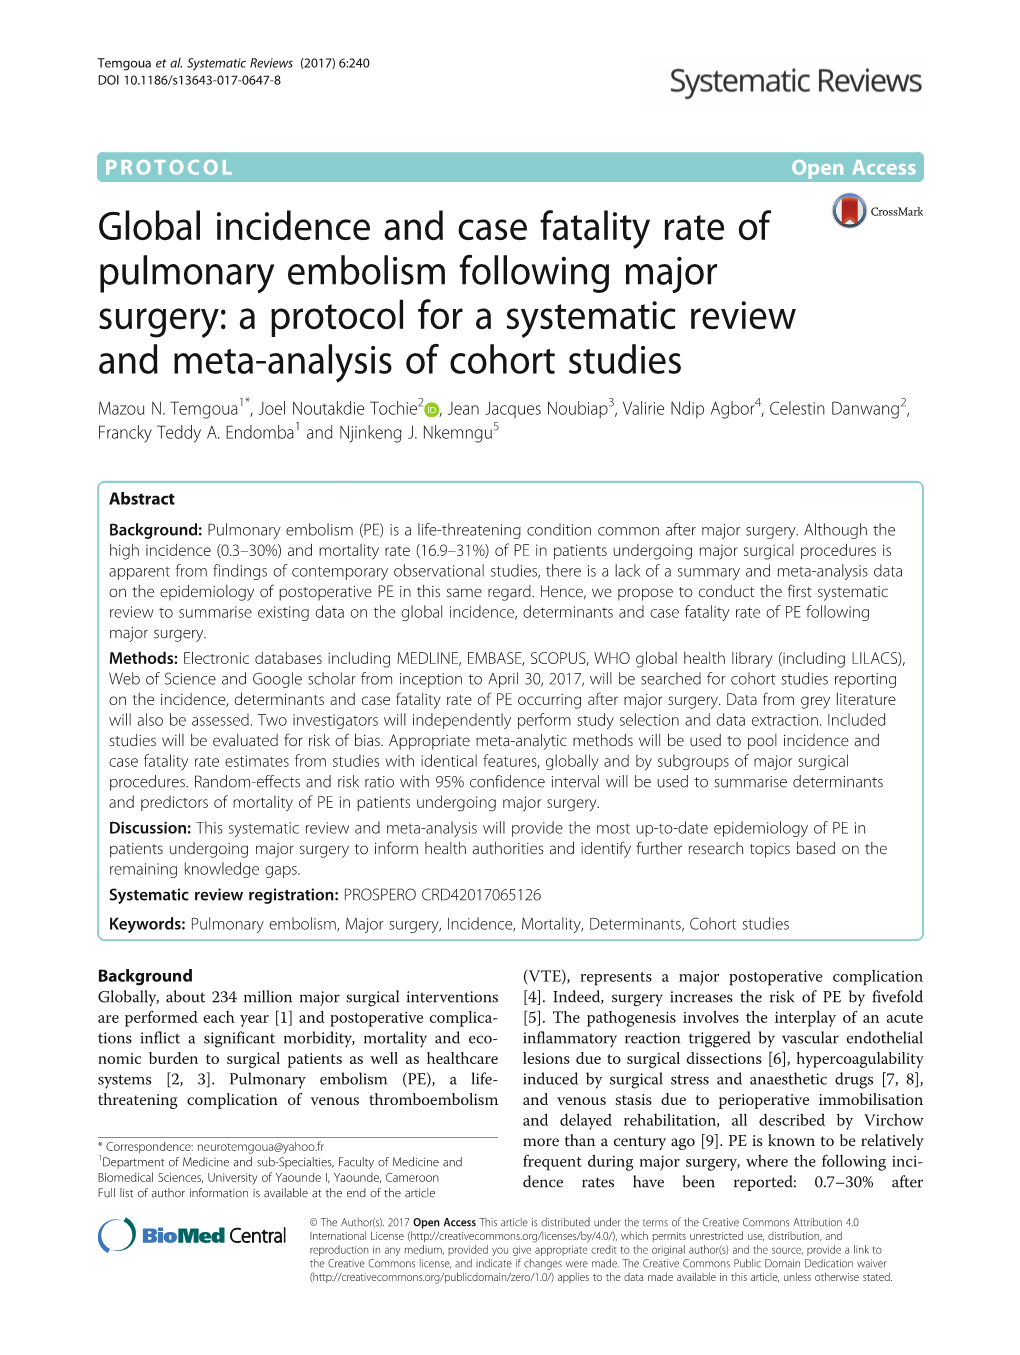 Global Incidence and Case Fatality Rate of Pulmonary Embolism Following Major Surgery: a Protocol for a Systematic Review and Meta-Analysis of Cohort Studies Mazou N